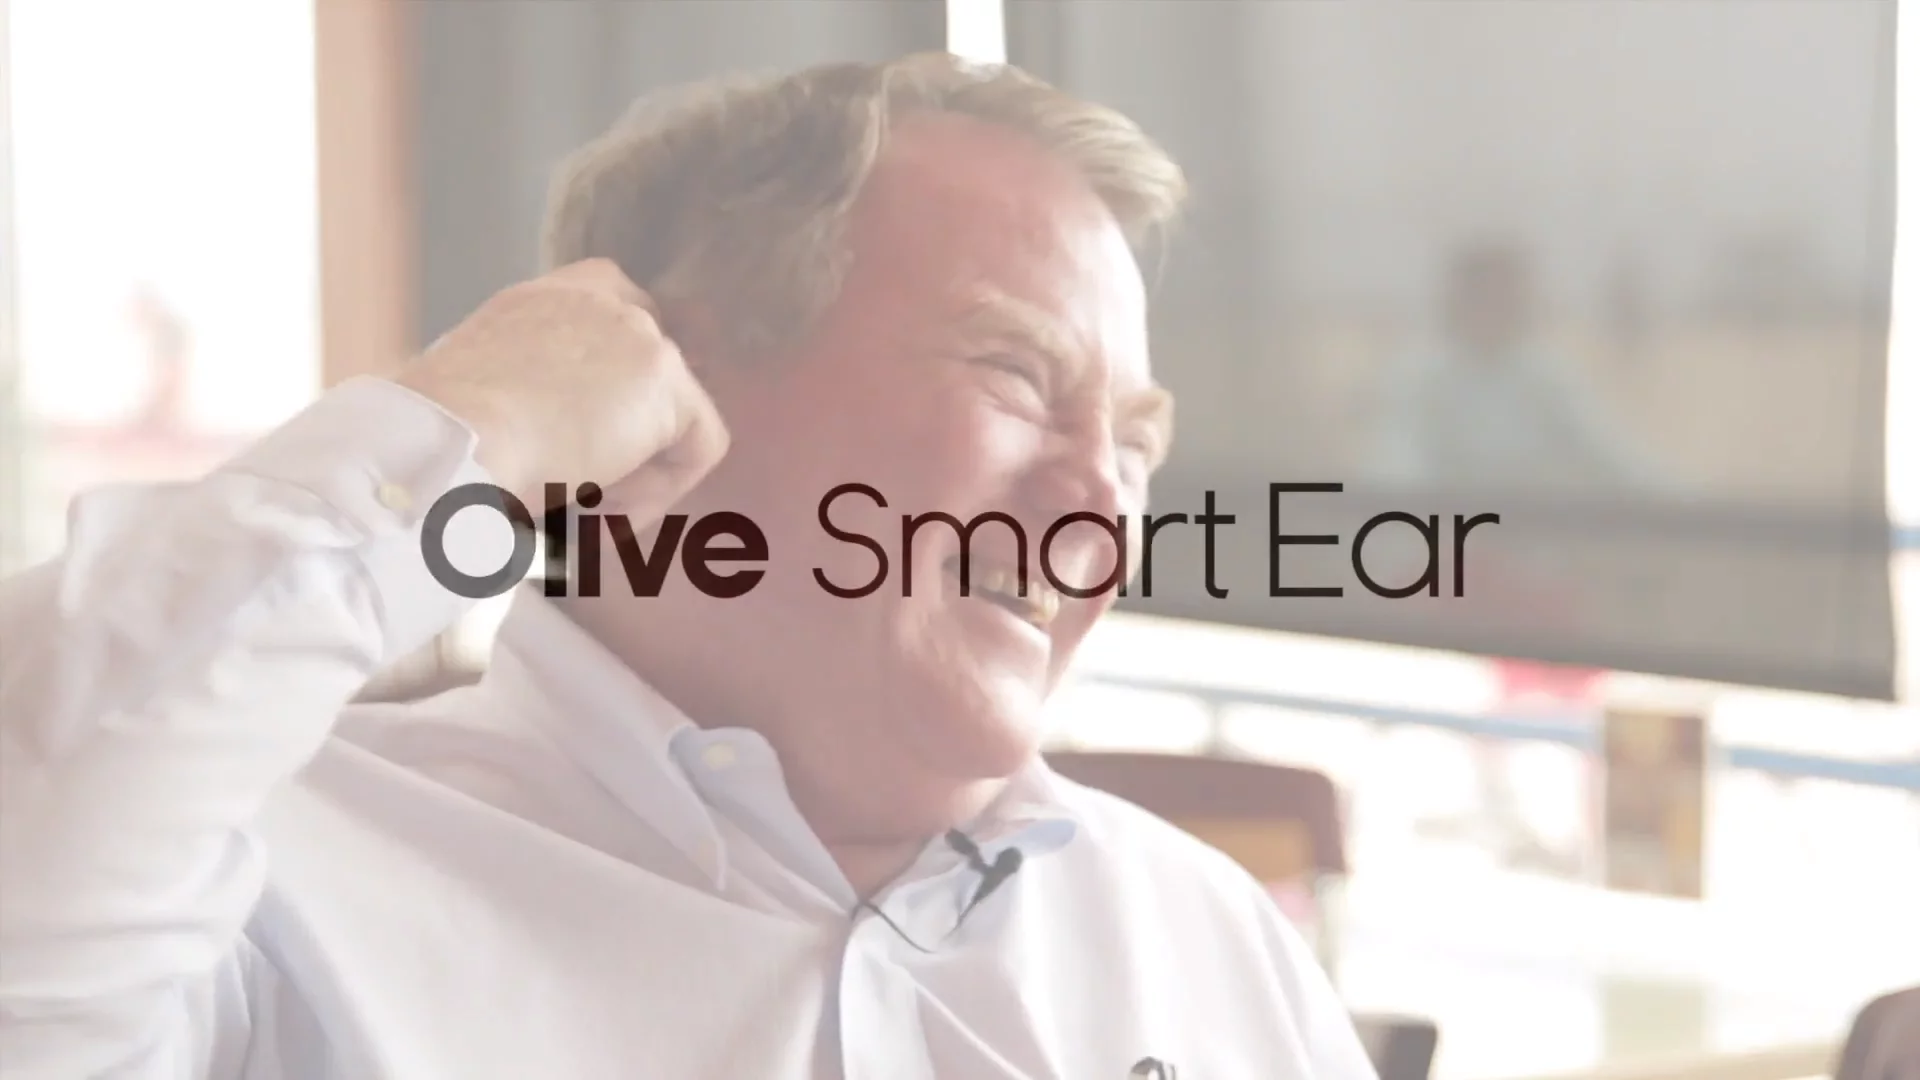 Olive Smart Ear Video Reviews